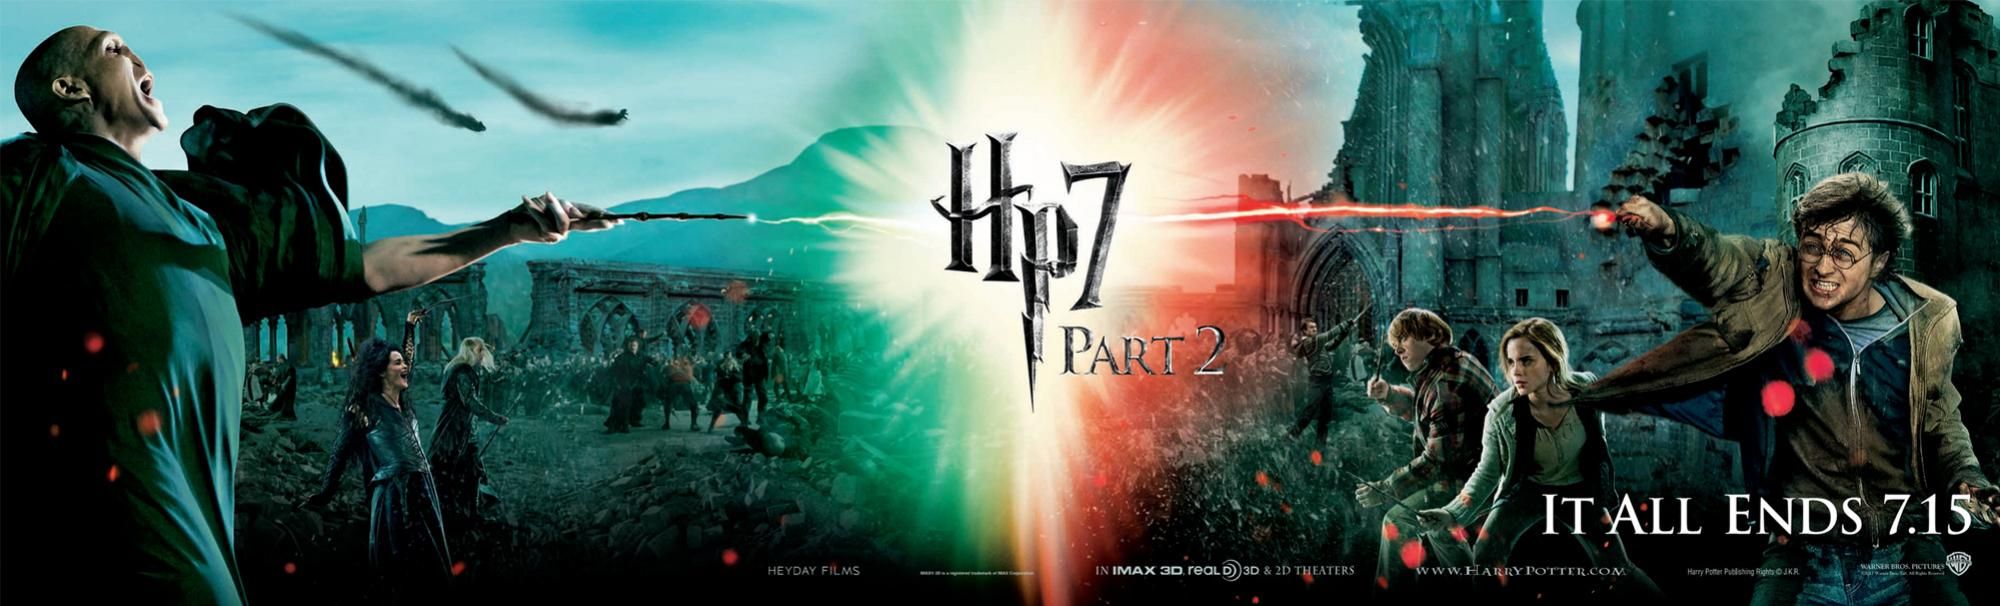 Harry Potter and the Deathly Hallows: Part 2 Banner #4